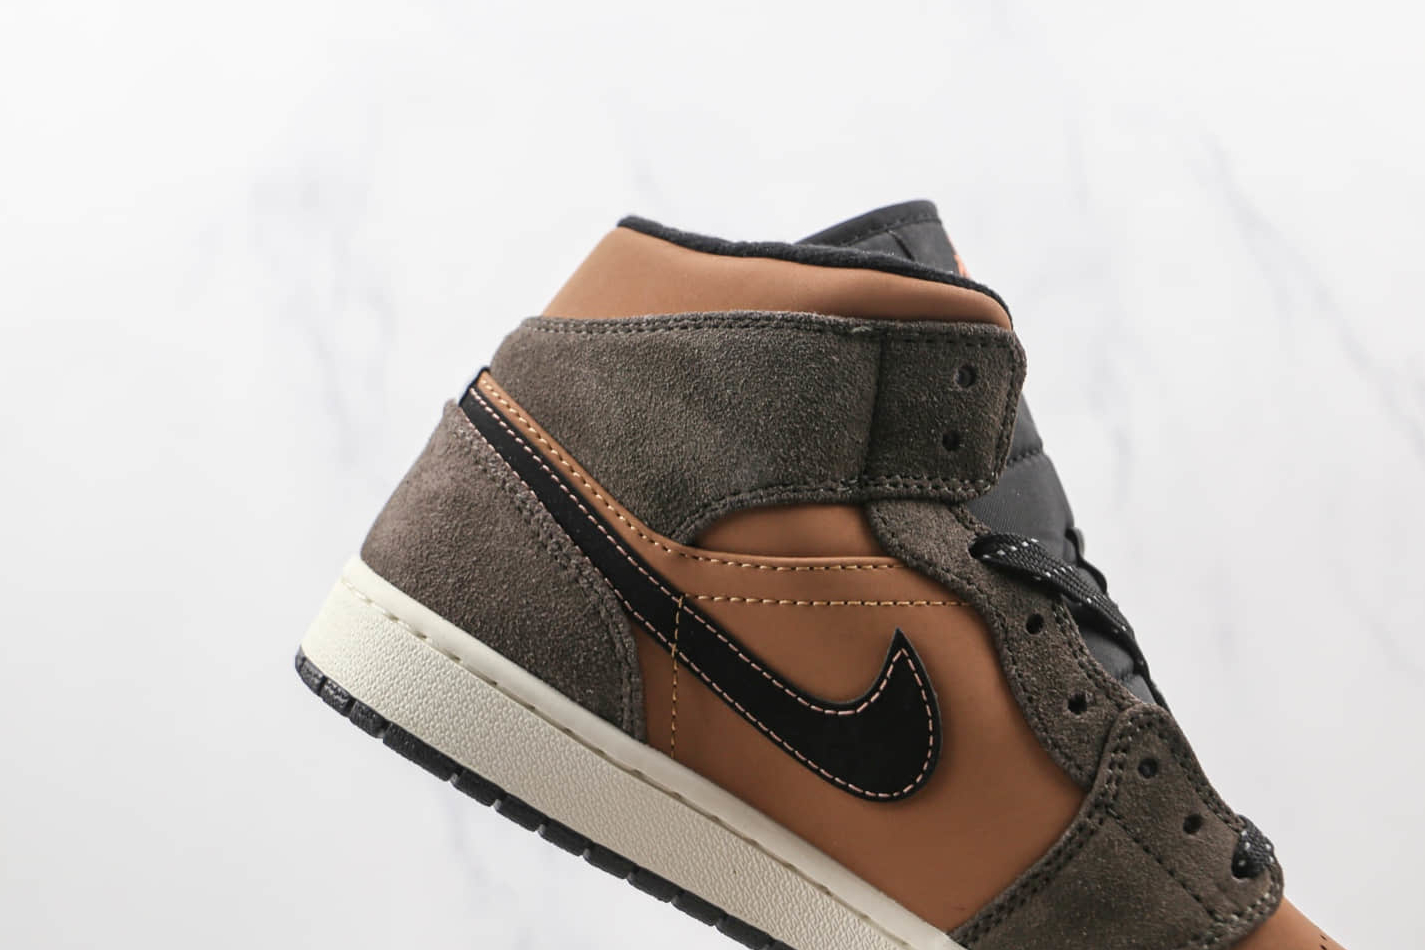 Air Jordan 1 Mid SE 'Dark Chocolate' DC7294-200 - Stylish & Trendy Sneakers Available Now